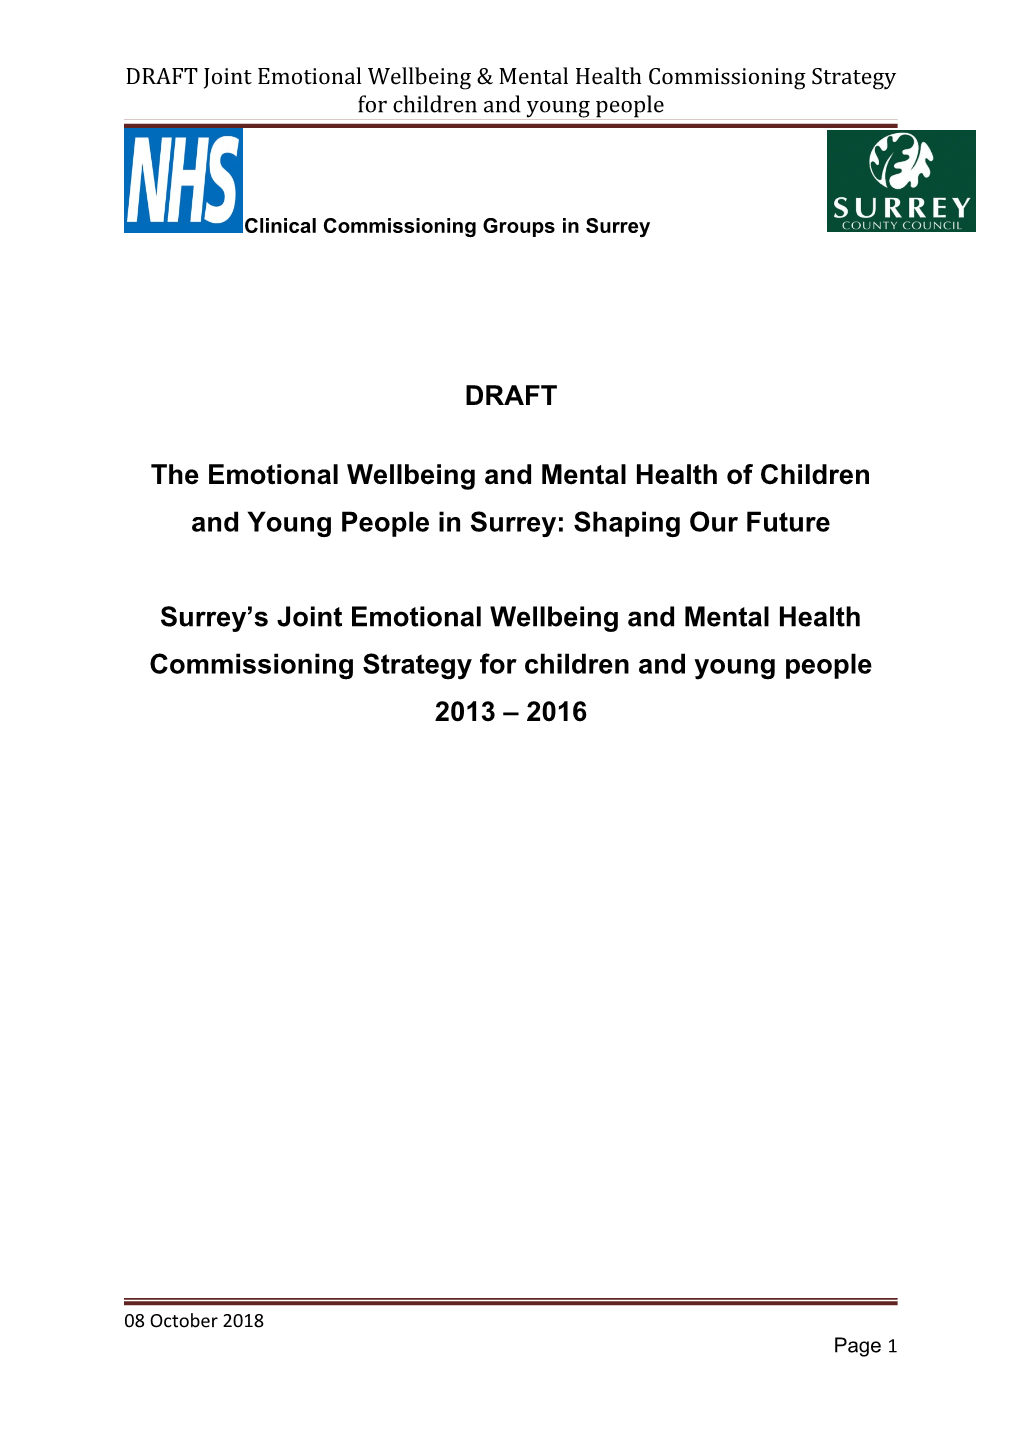 DRAFT Joint Emotional Wellbeing & Mental Health Commissioning Strategy for Children And